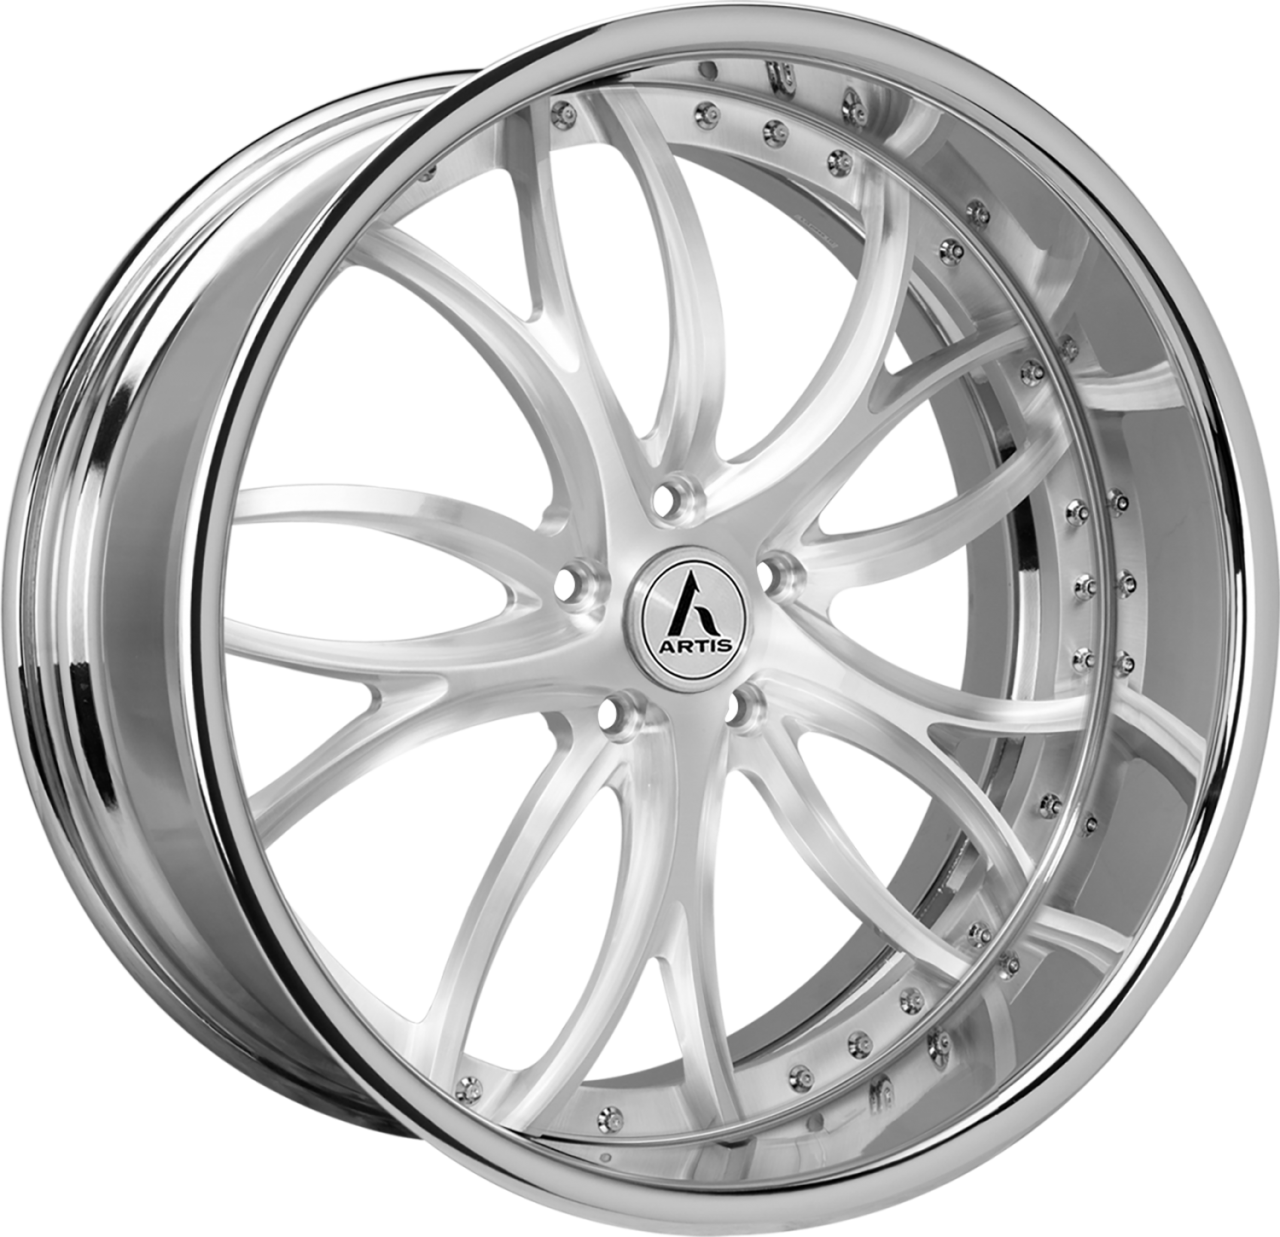 Artis Forged Biscayne-M wheel with Brushed finish